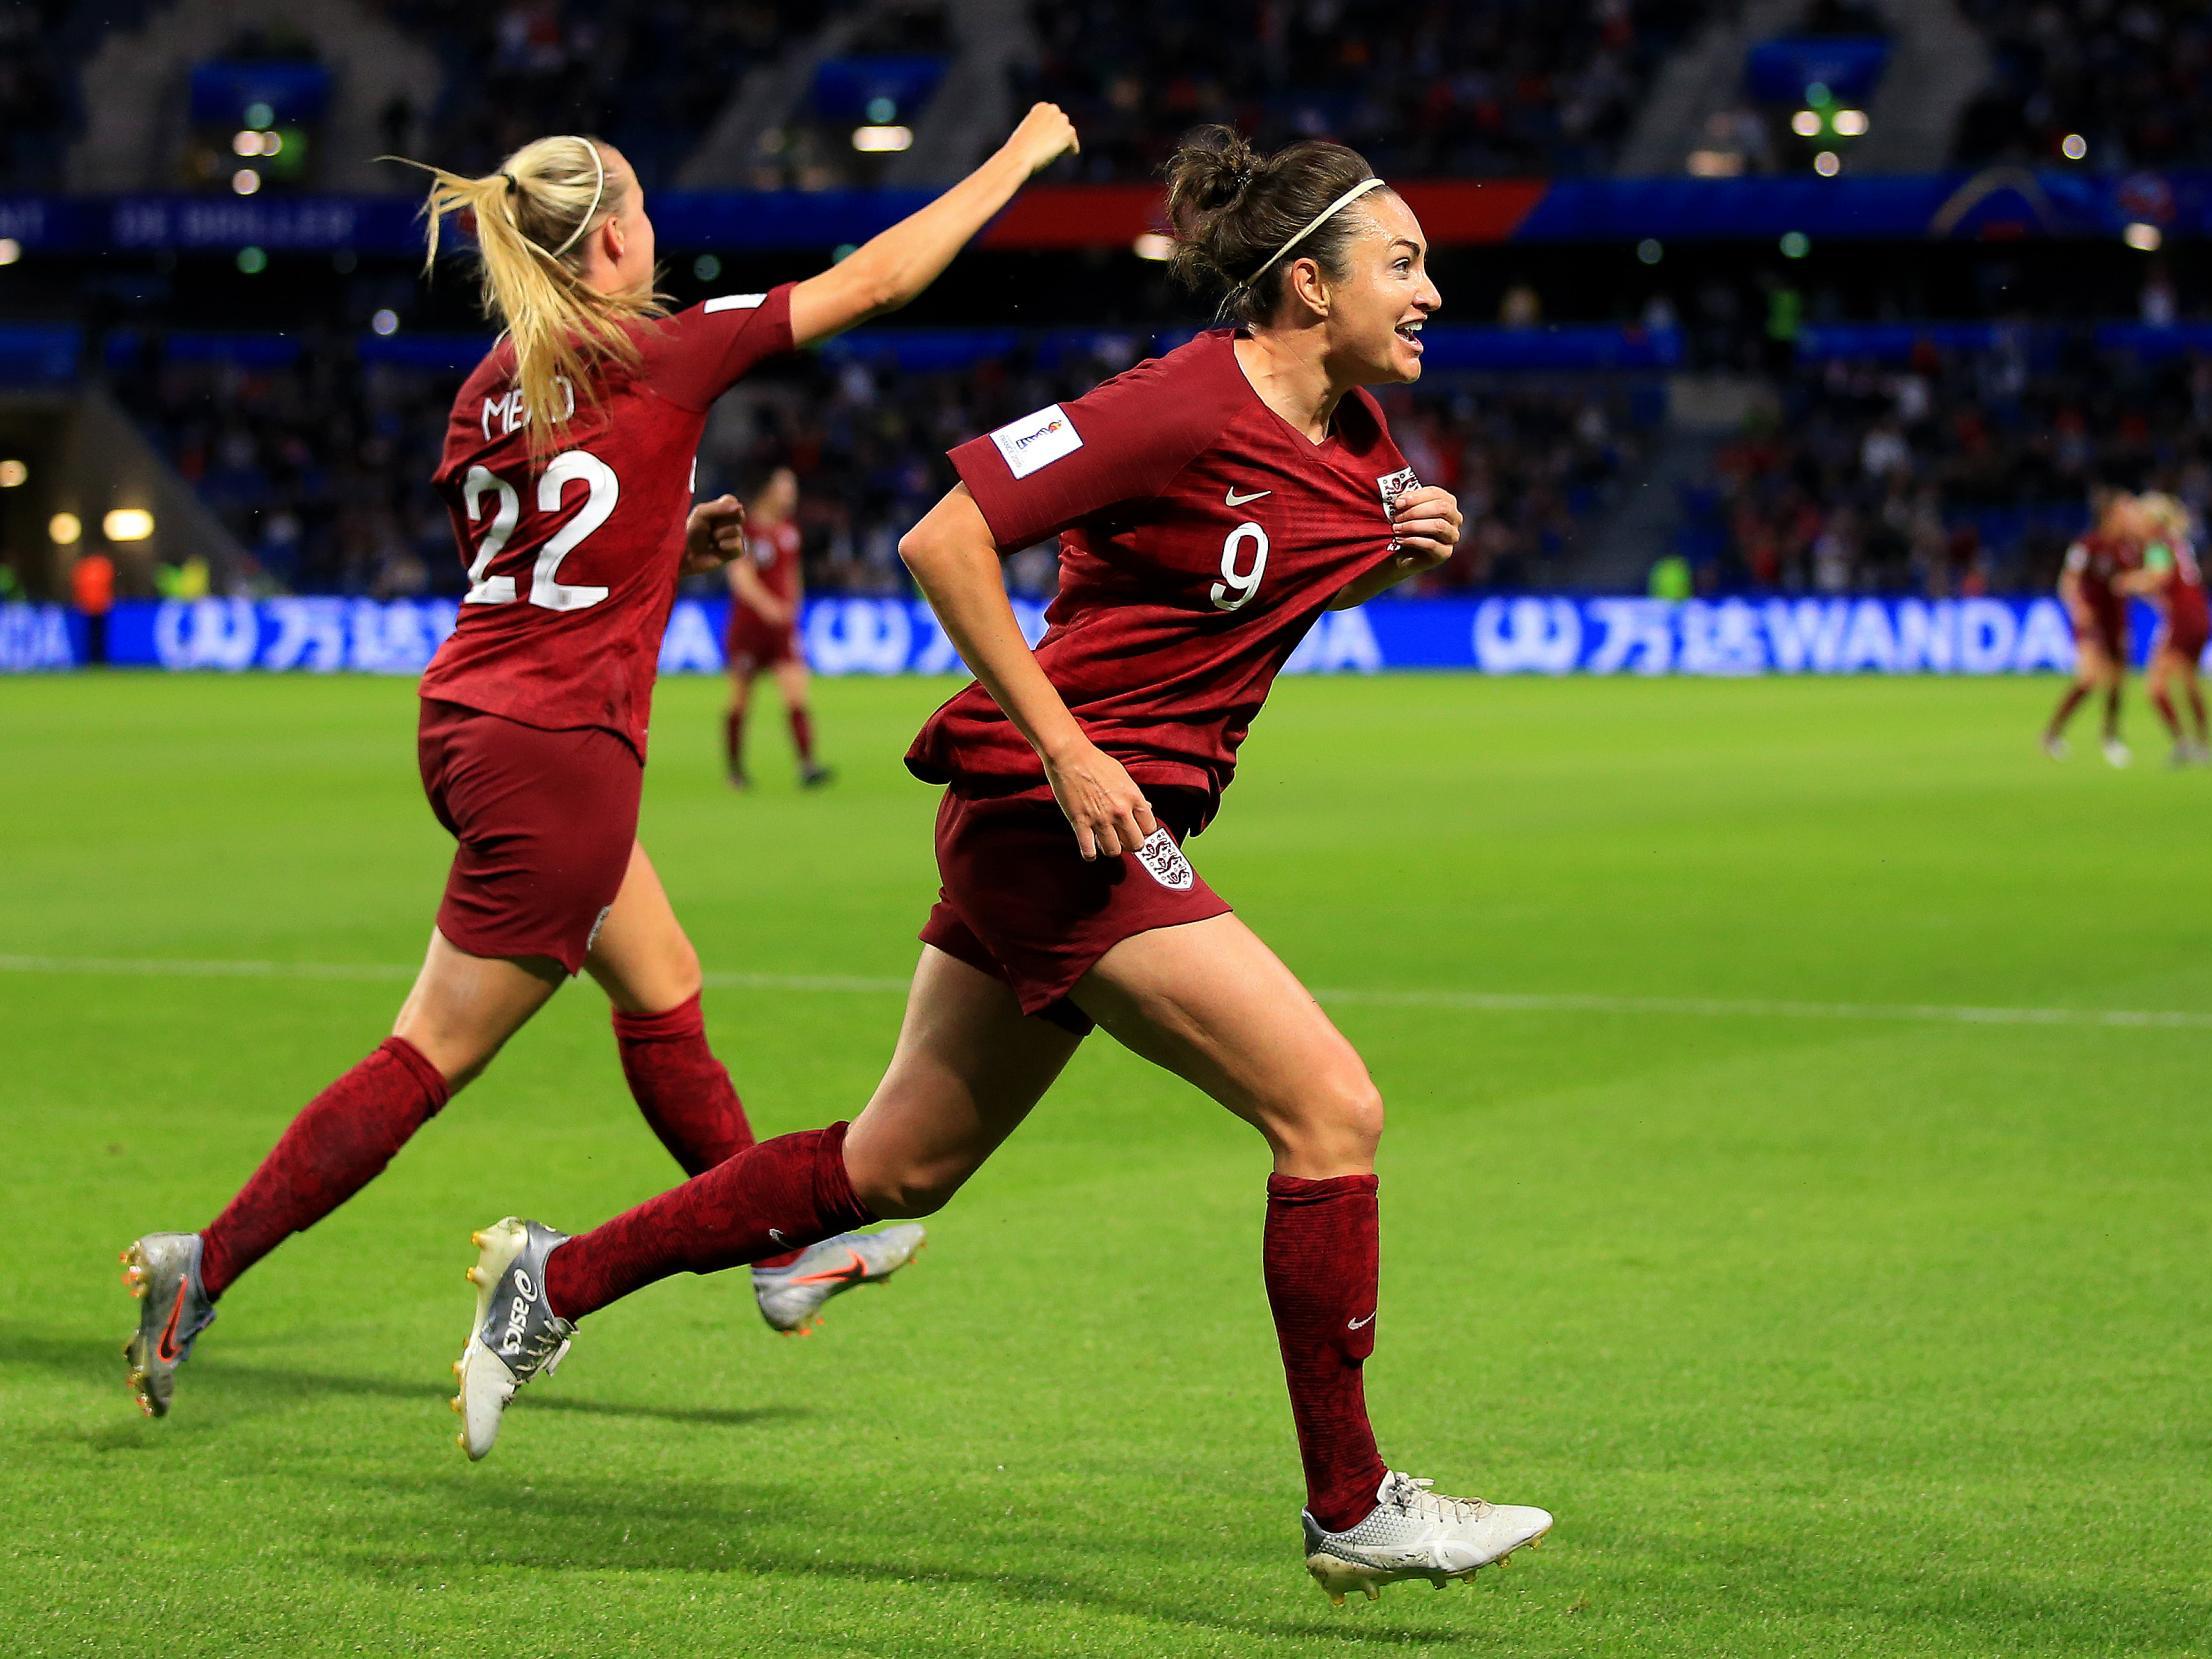 England women put three past USA, Argentina men hold on in